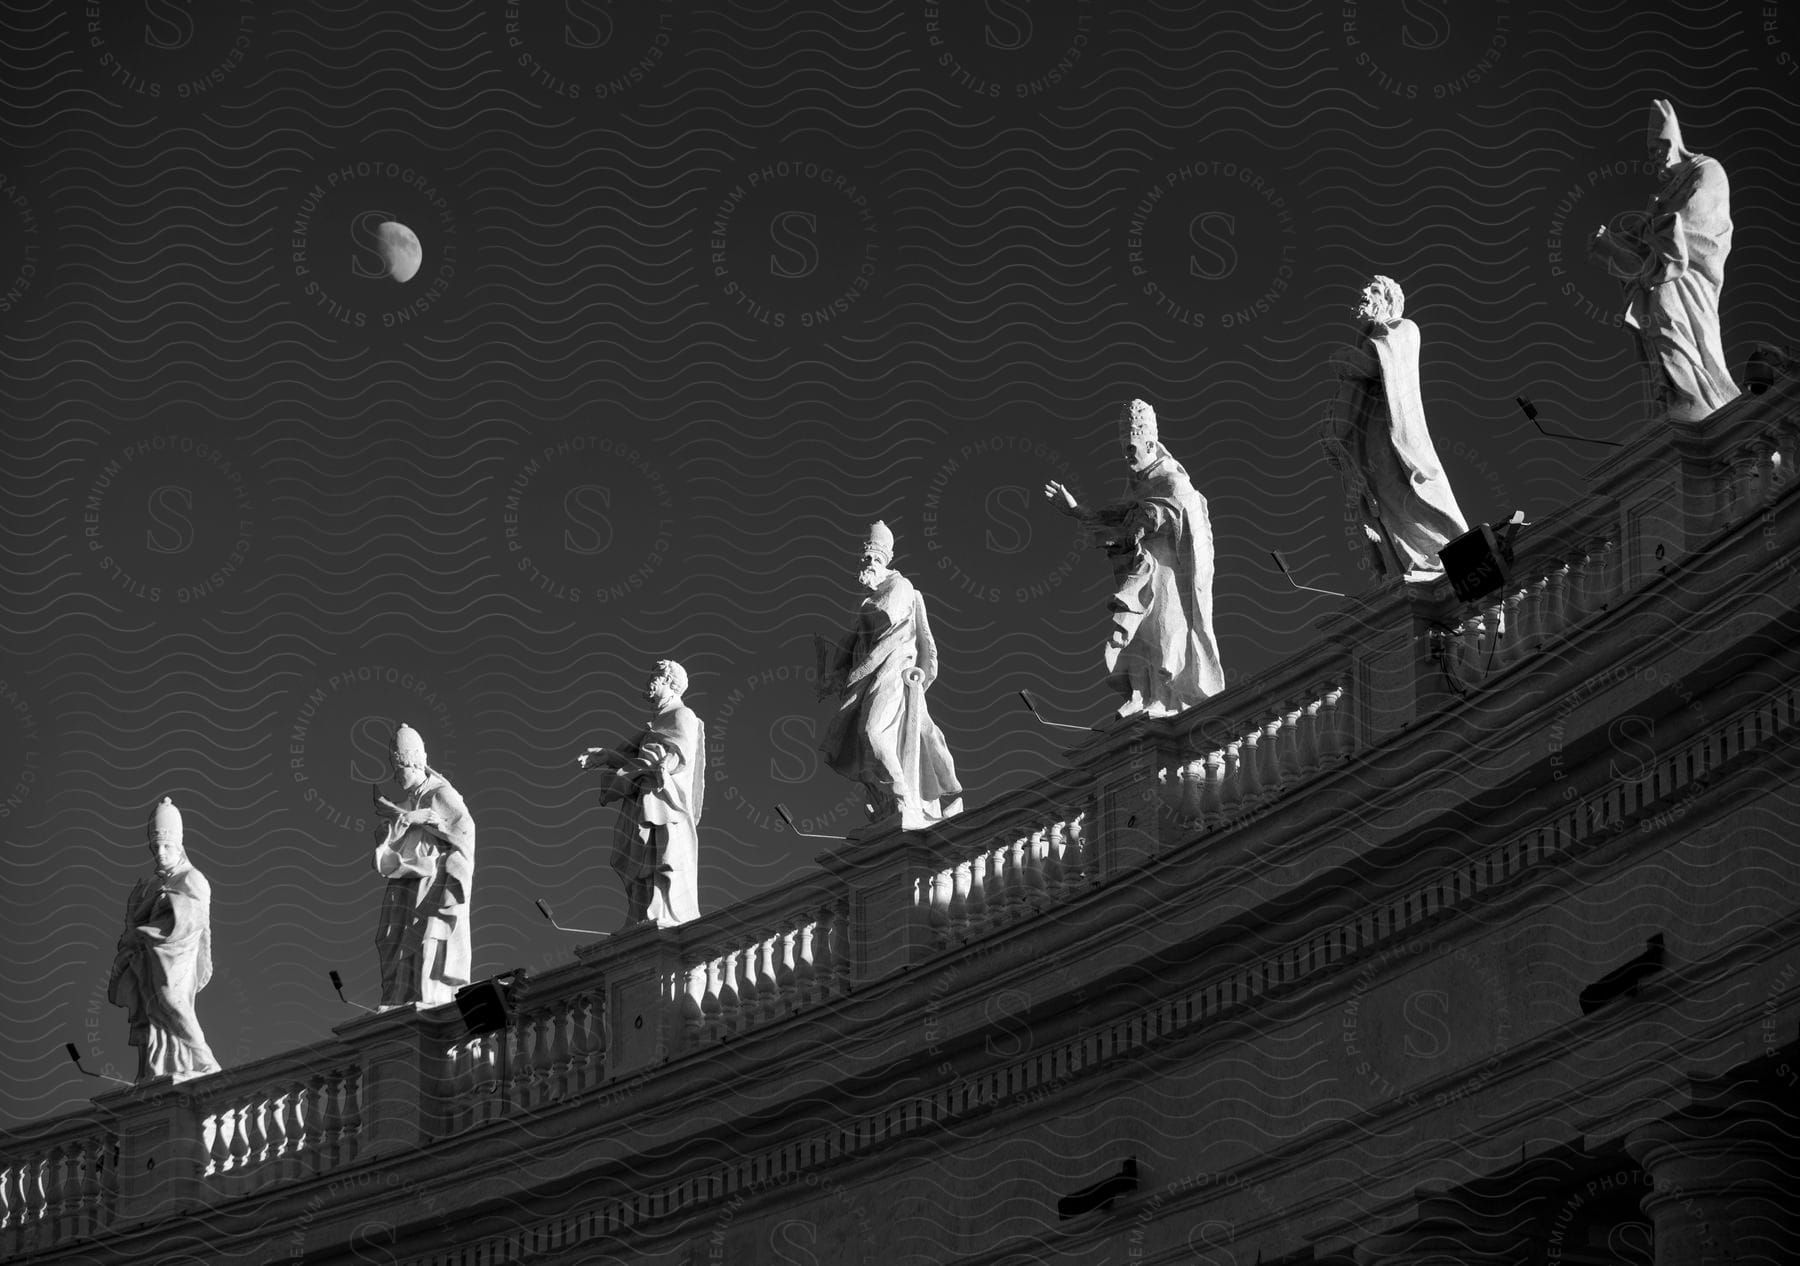 A row of statues on the balcony of a classical style building with a sky and moon in the background